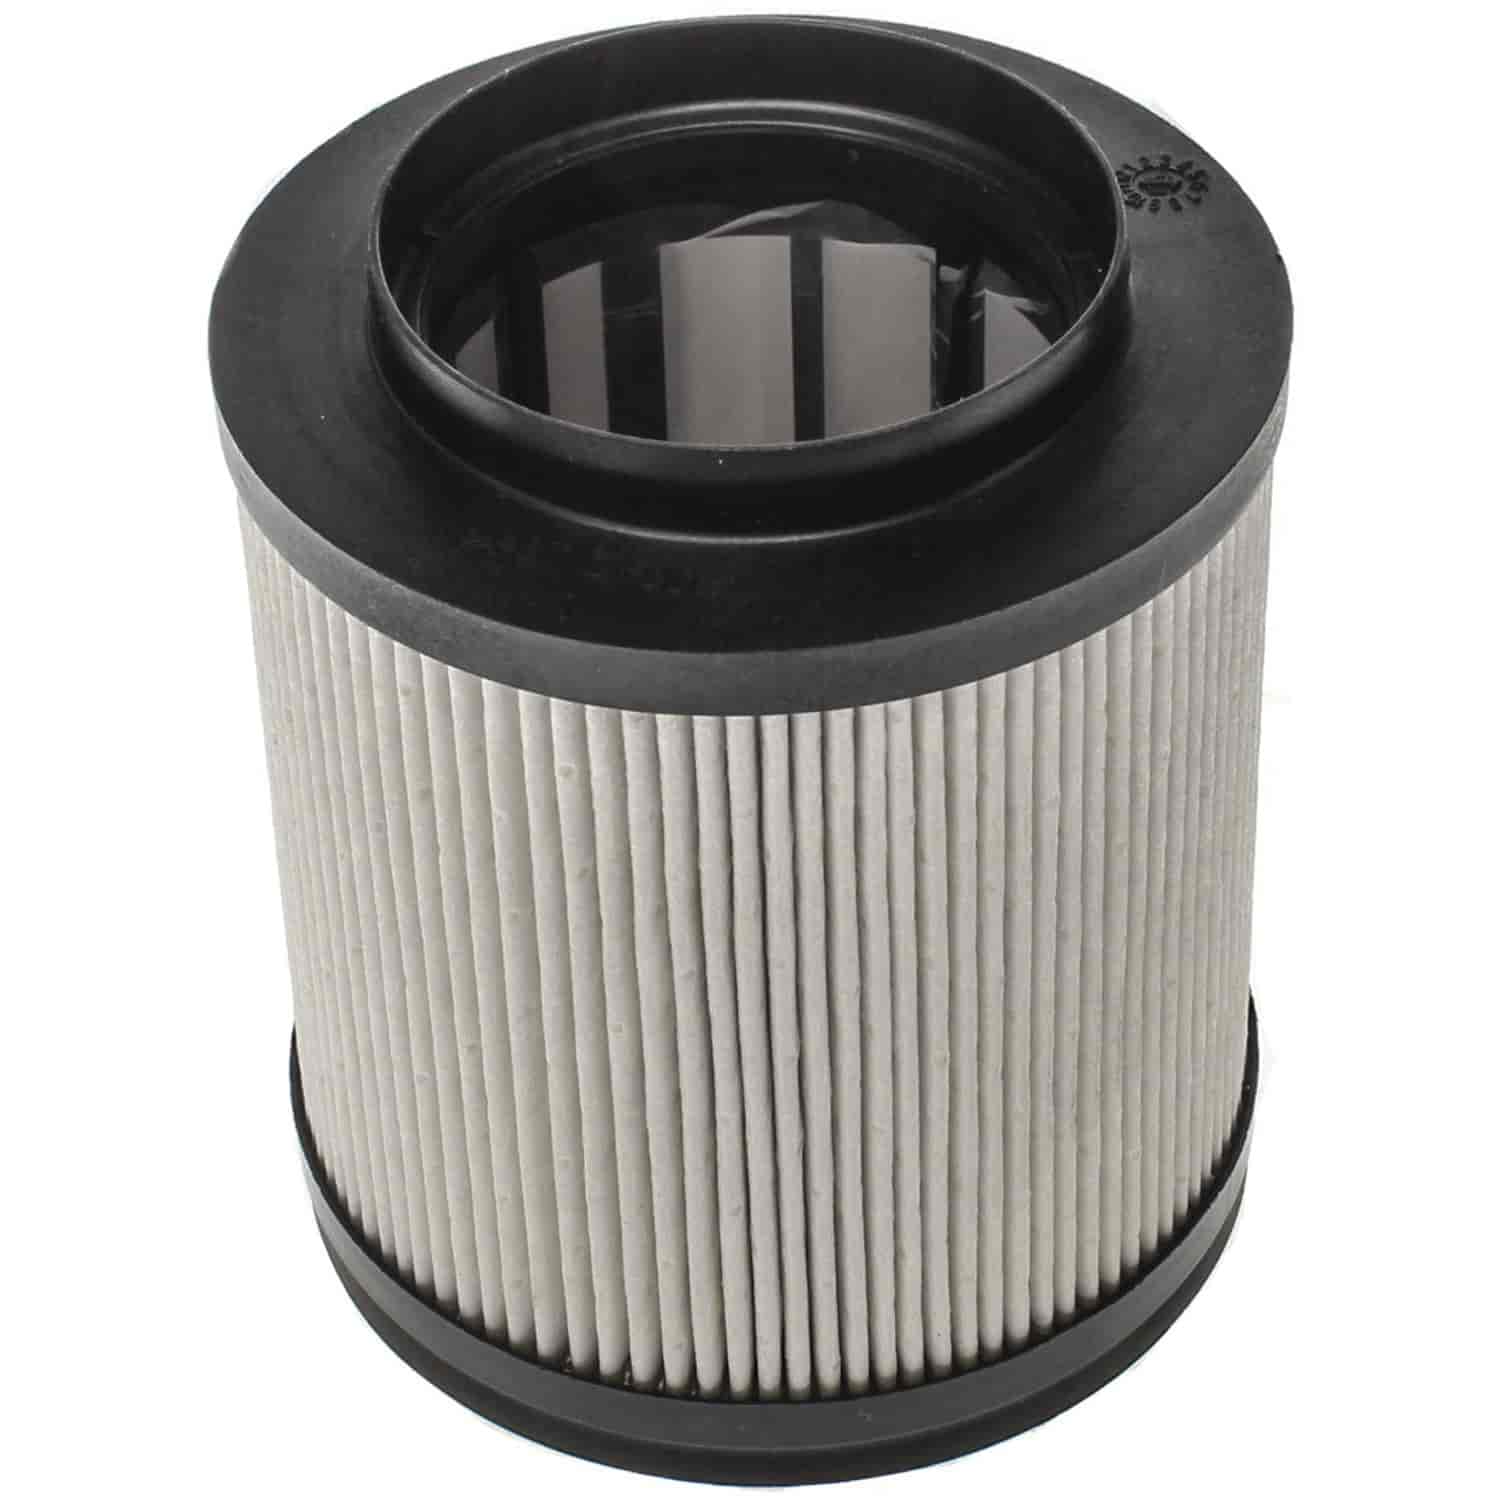 Mahle Fuel Filter Ford F250 Super Duty F-350